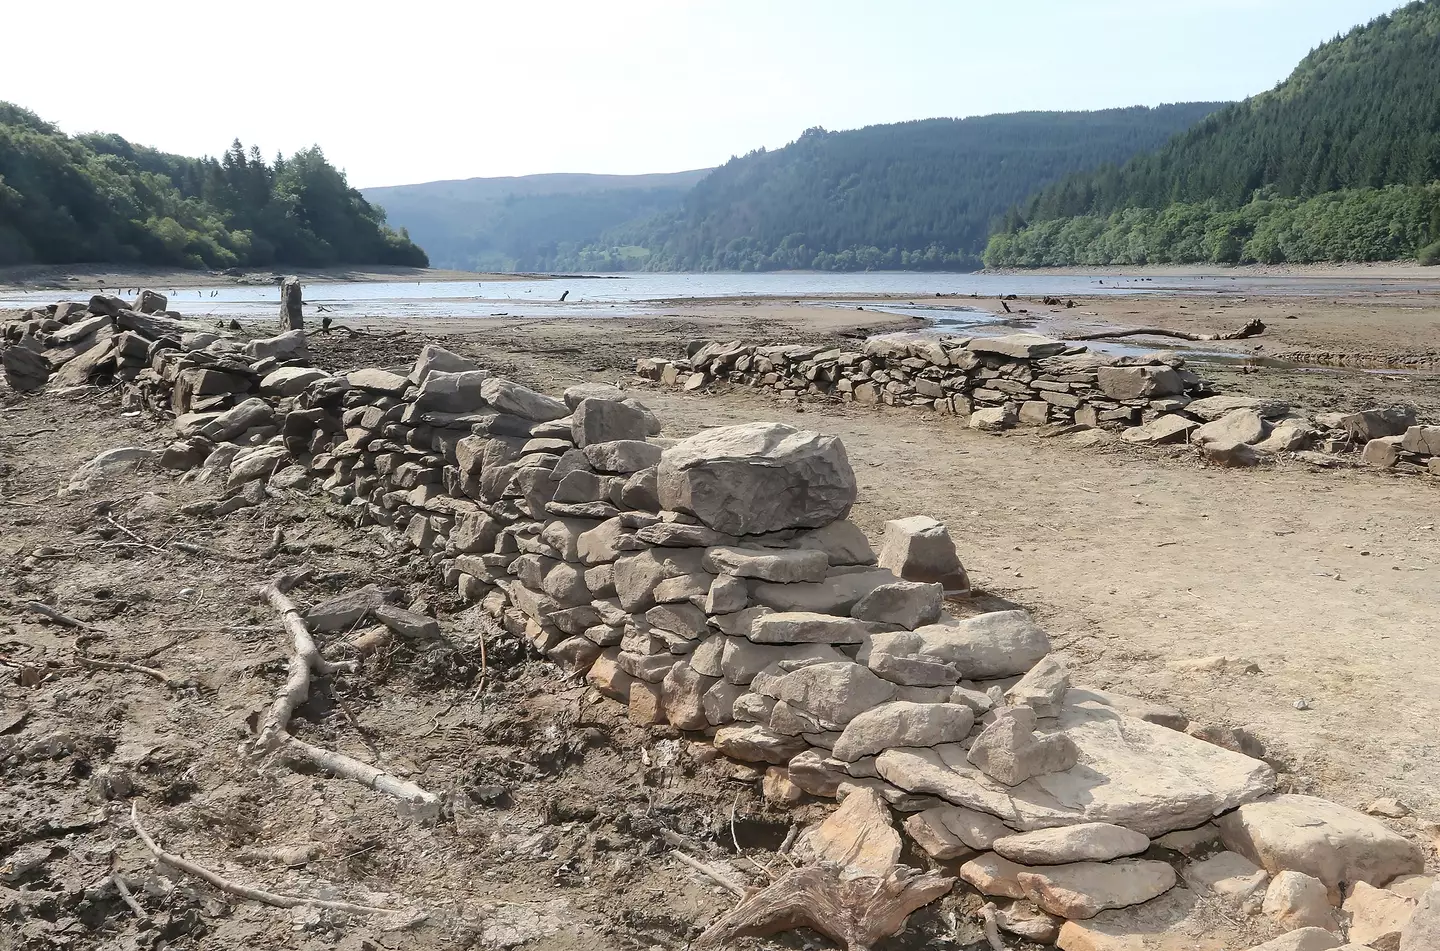 Walls of old buildings emerged when the lake dried up.